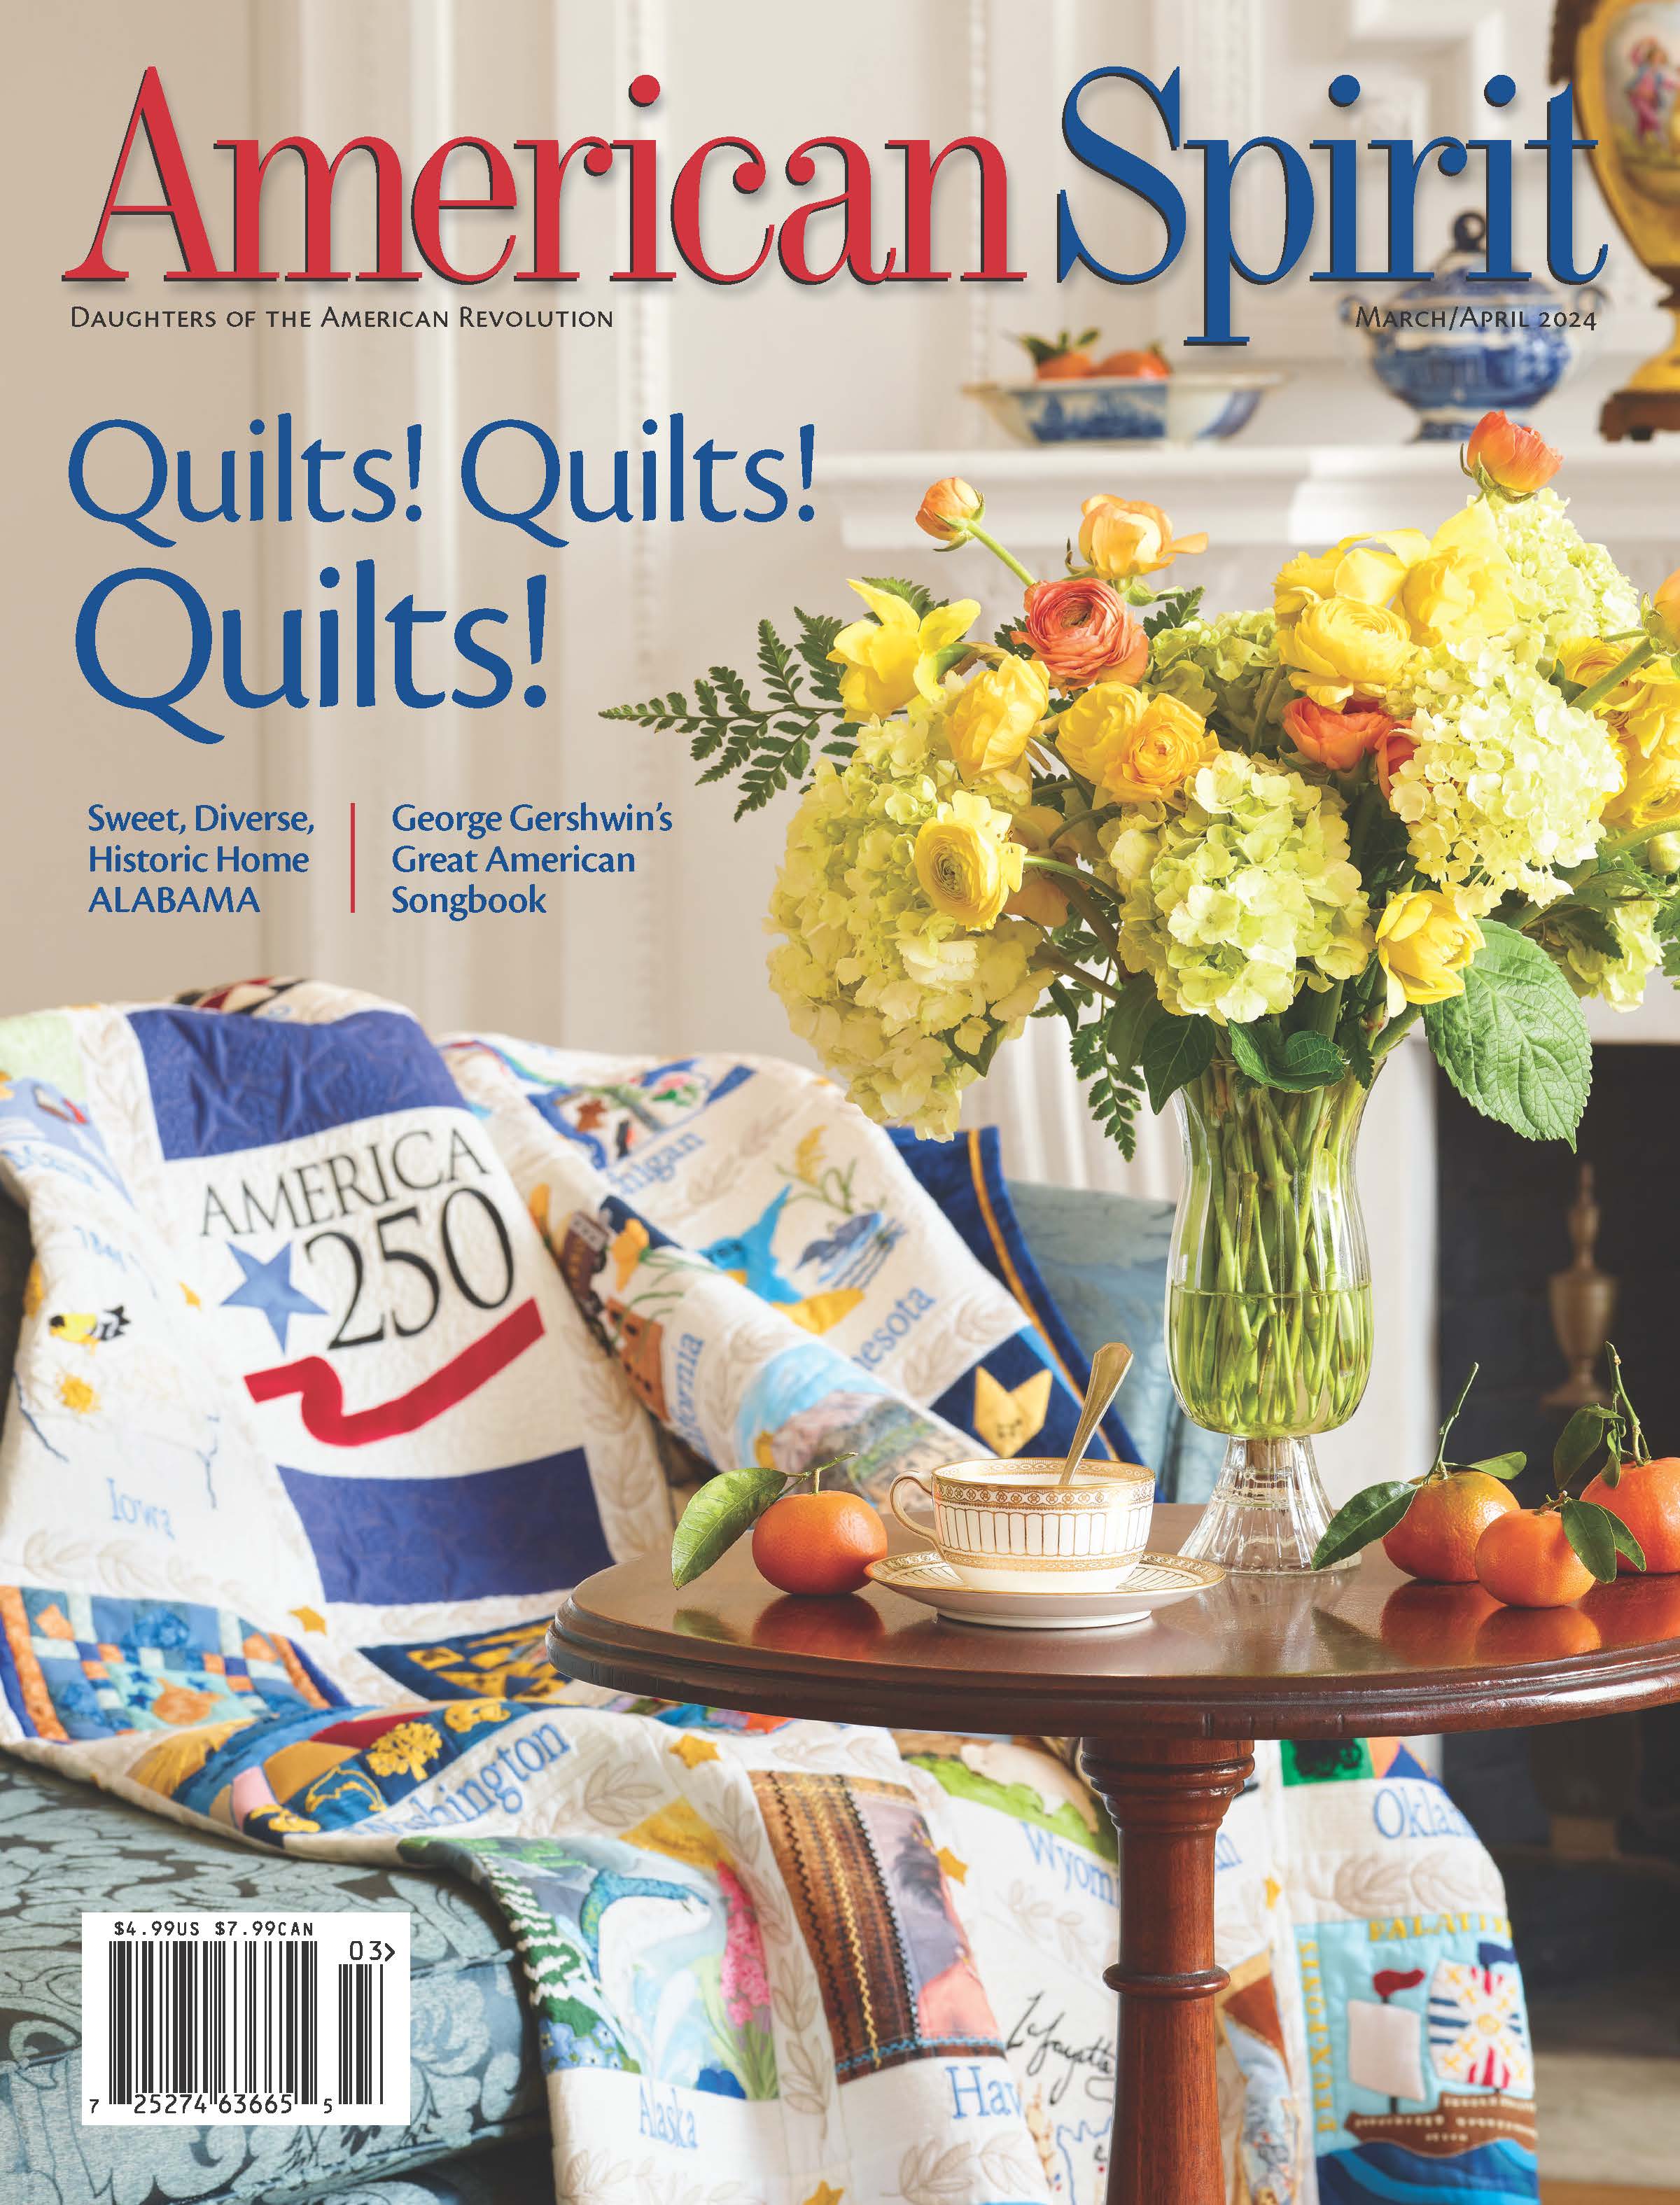 American spirit magazine cover with the America250! Quilt